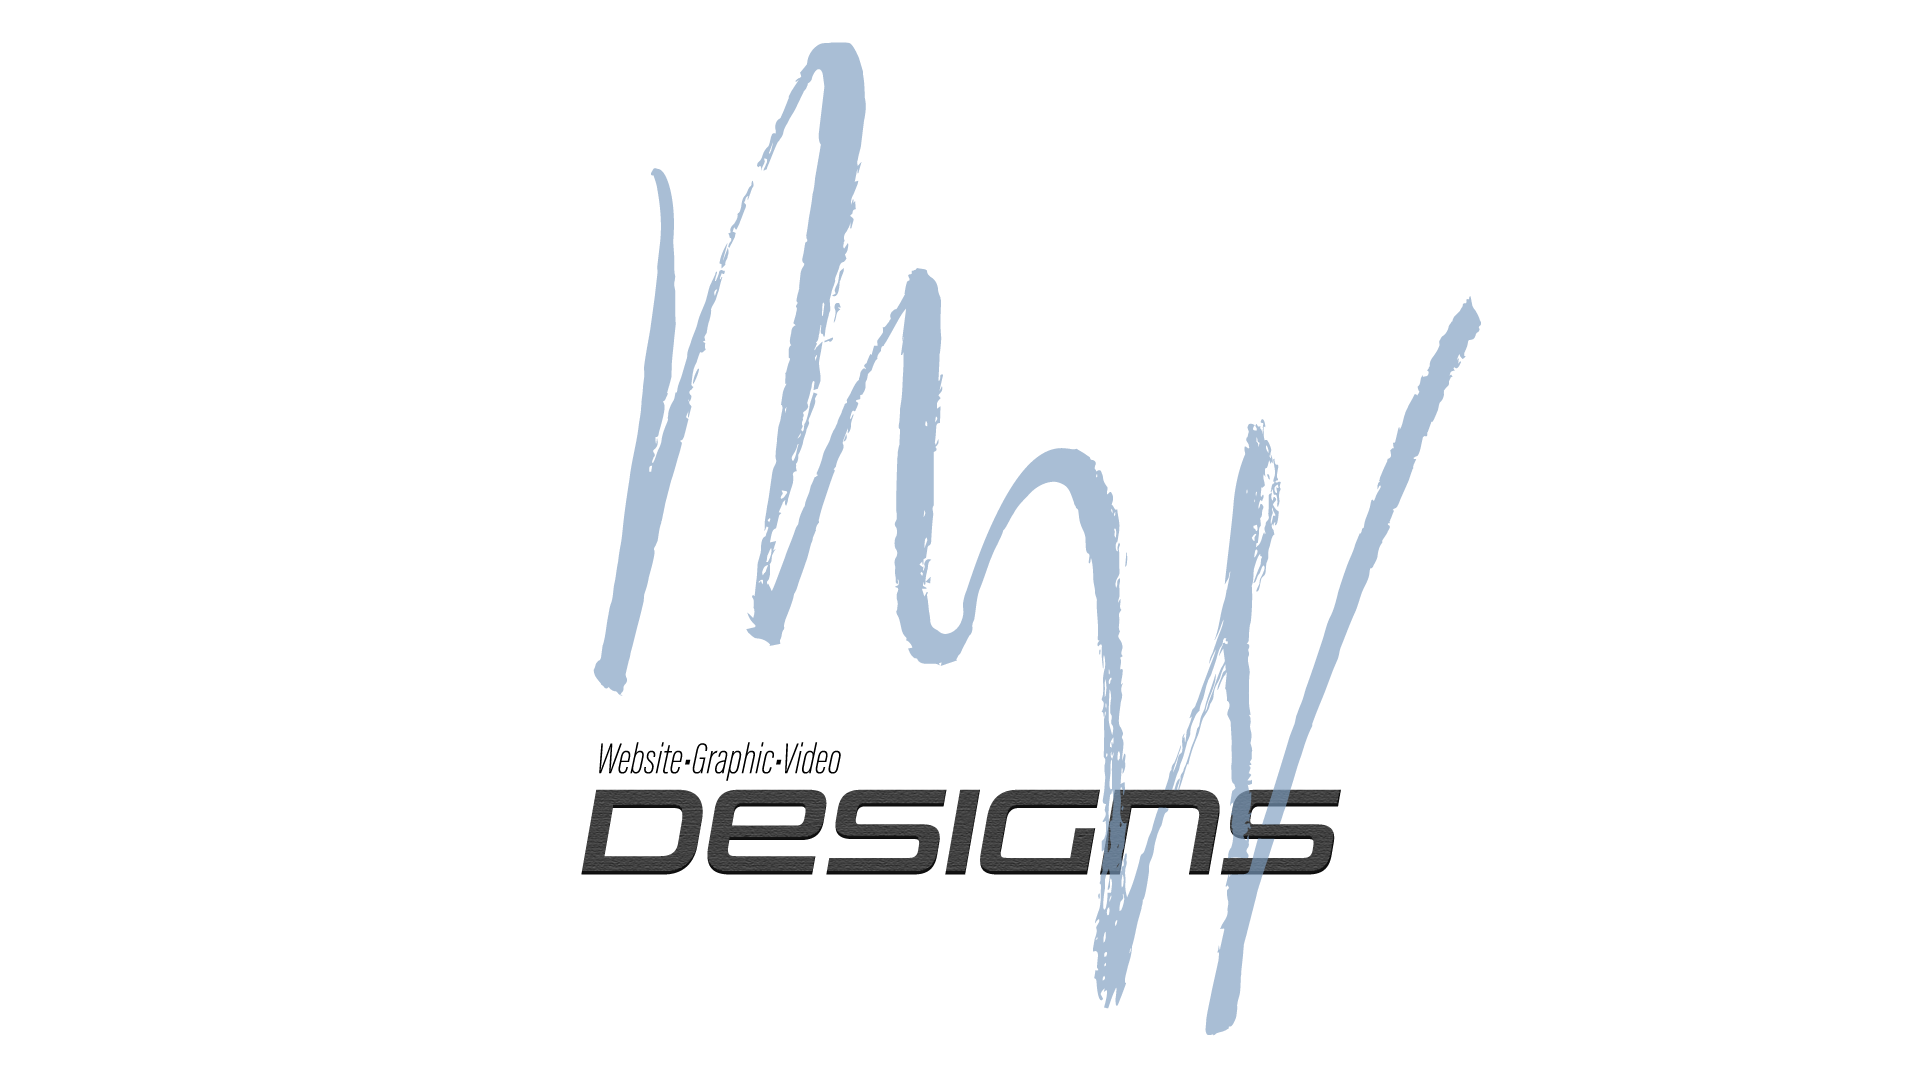 MW Designs - Professional web and graphic design logo representing creativity and expertise